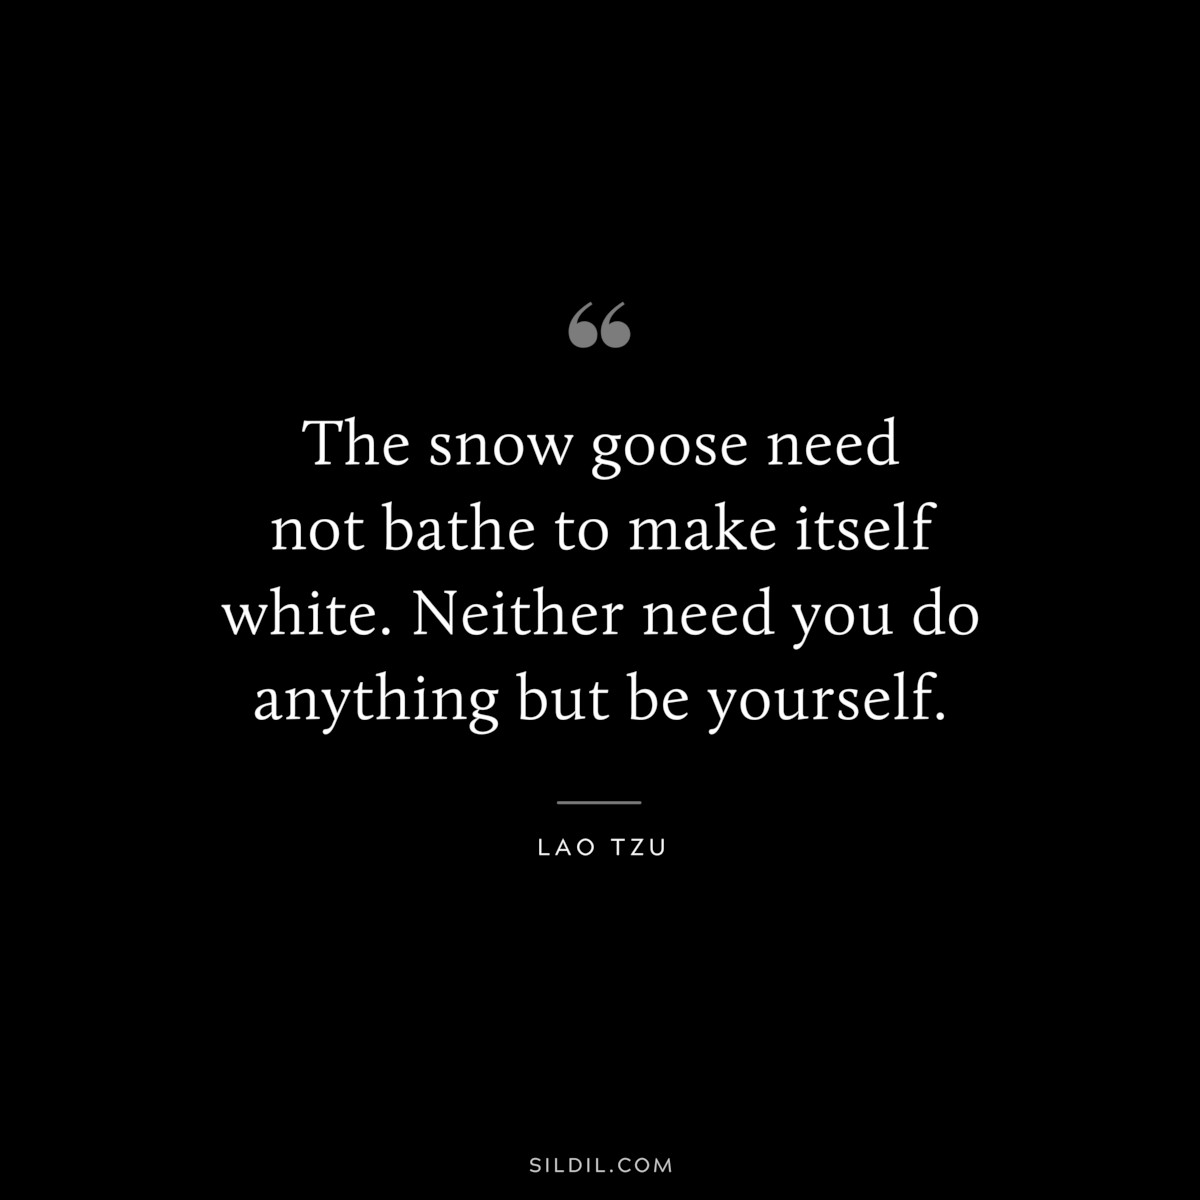 The snow goose need not bathe to make itself white. Neither need you do anything but be yourself. ― Lao Tzu